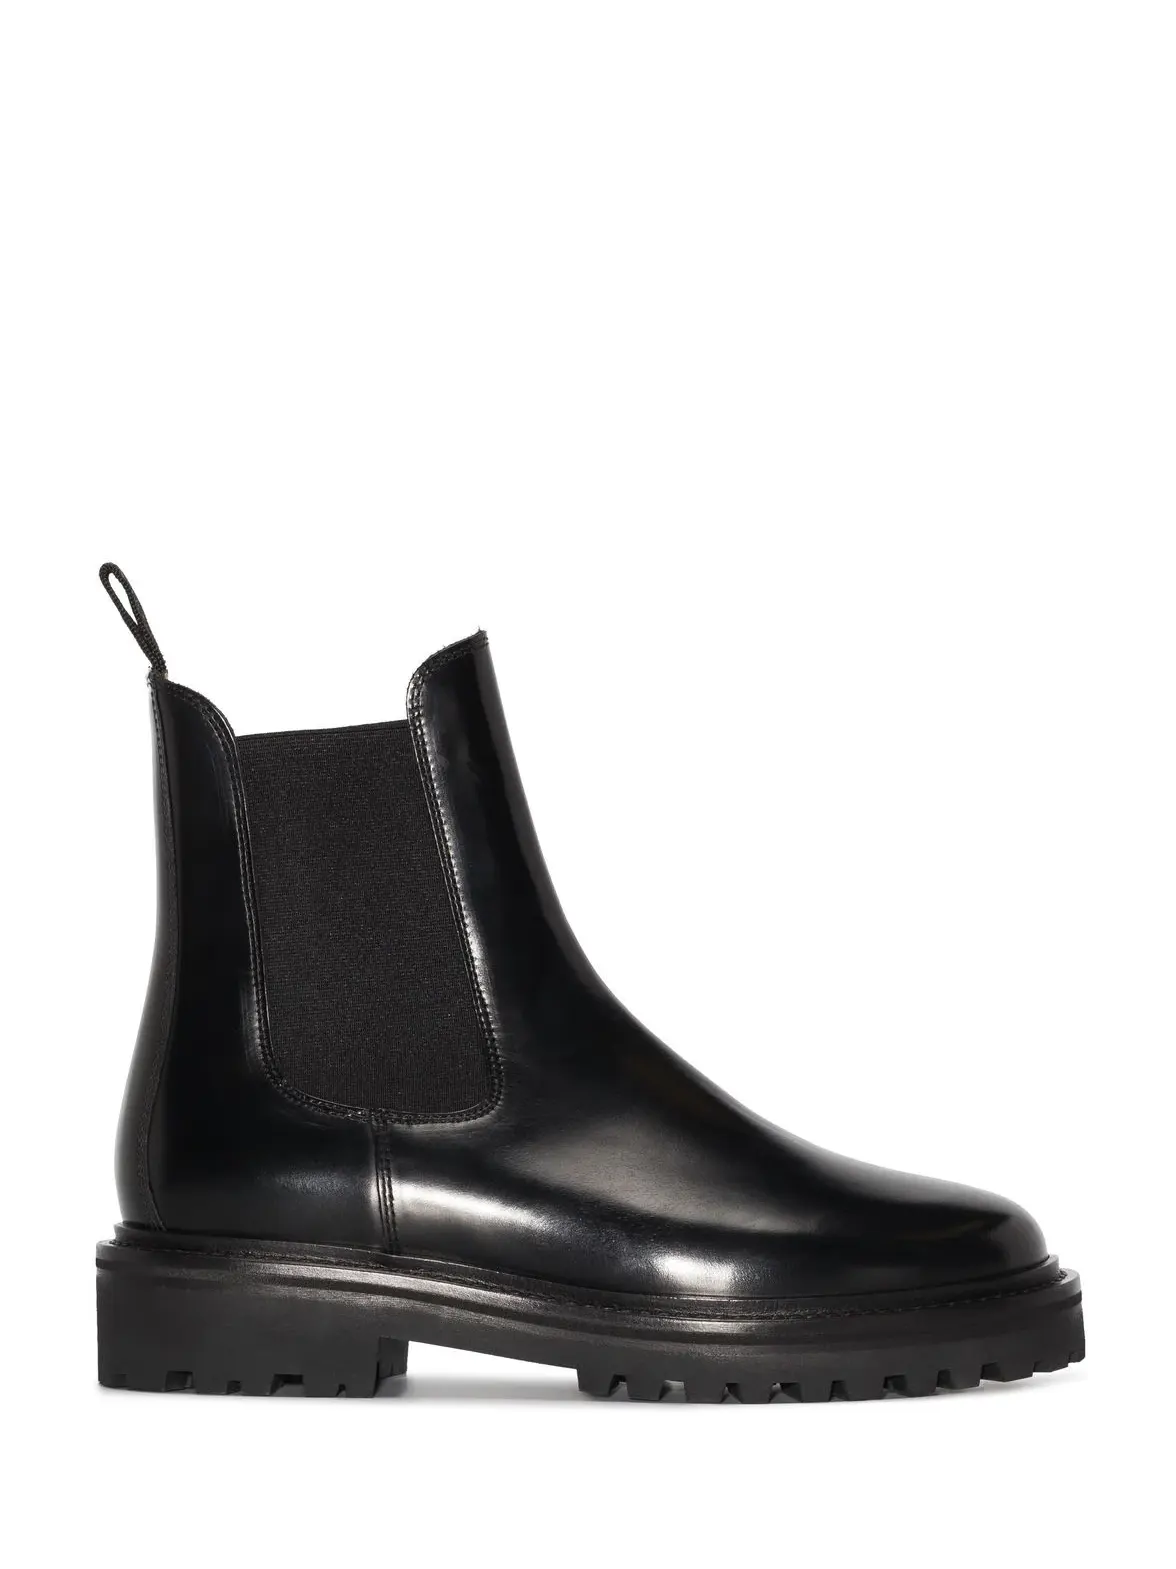 CASTAY chelsea boots, black